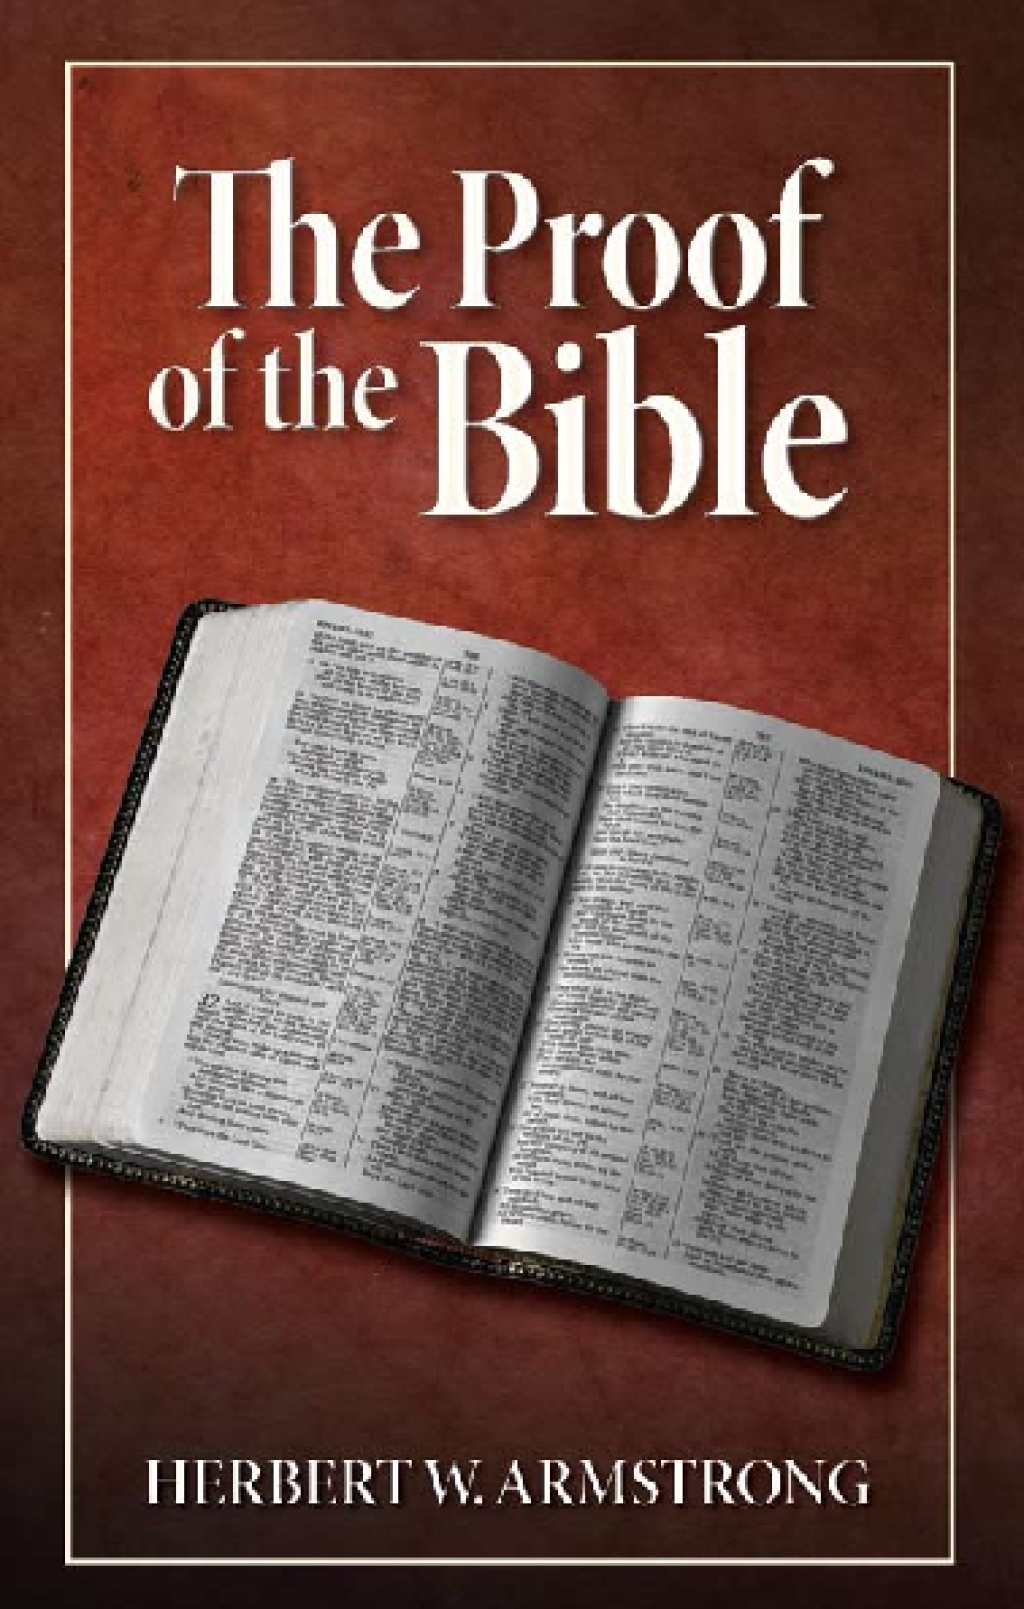 The Proof of the Bible